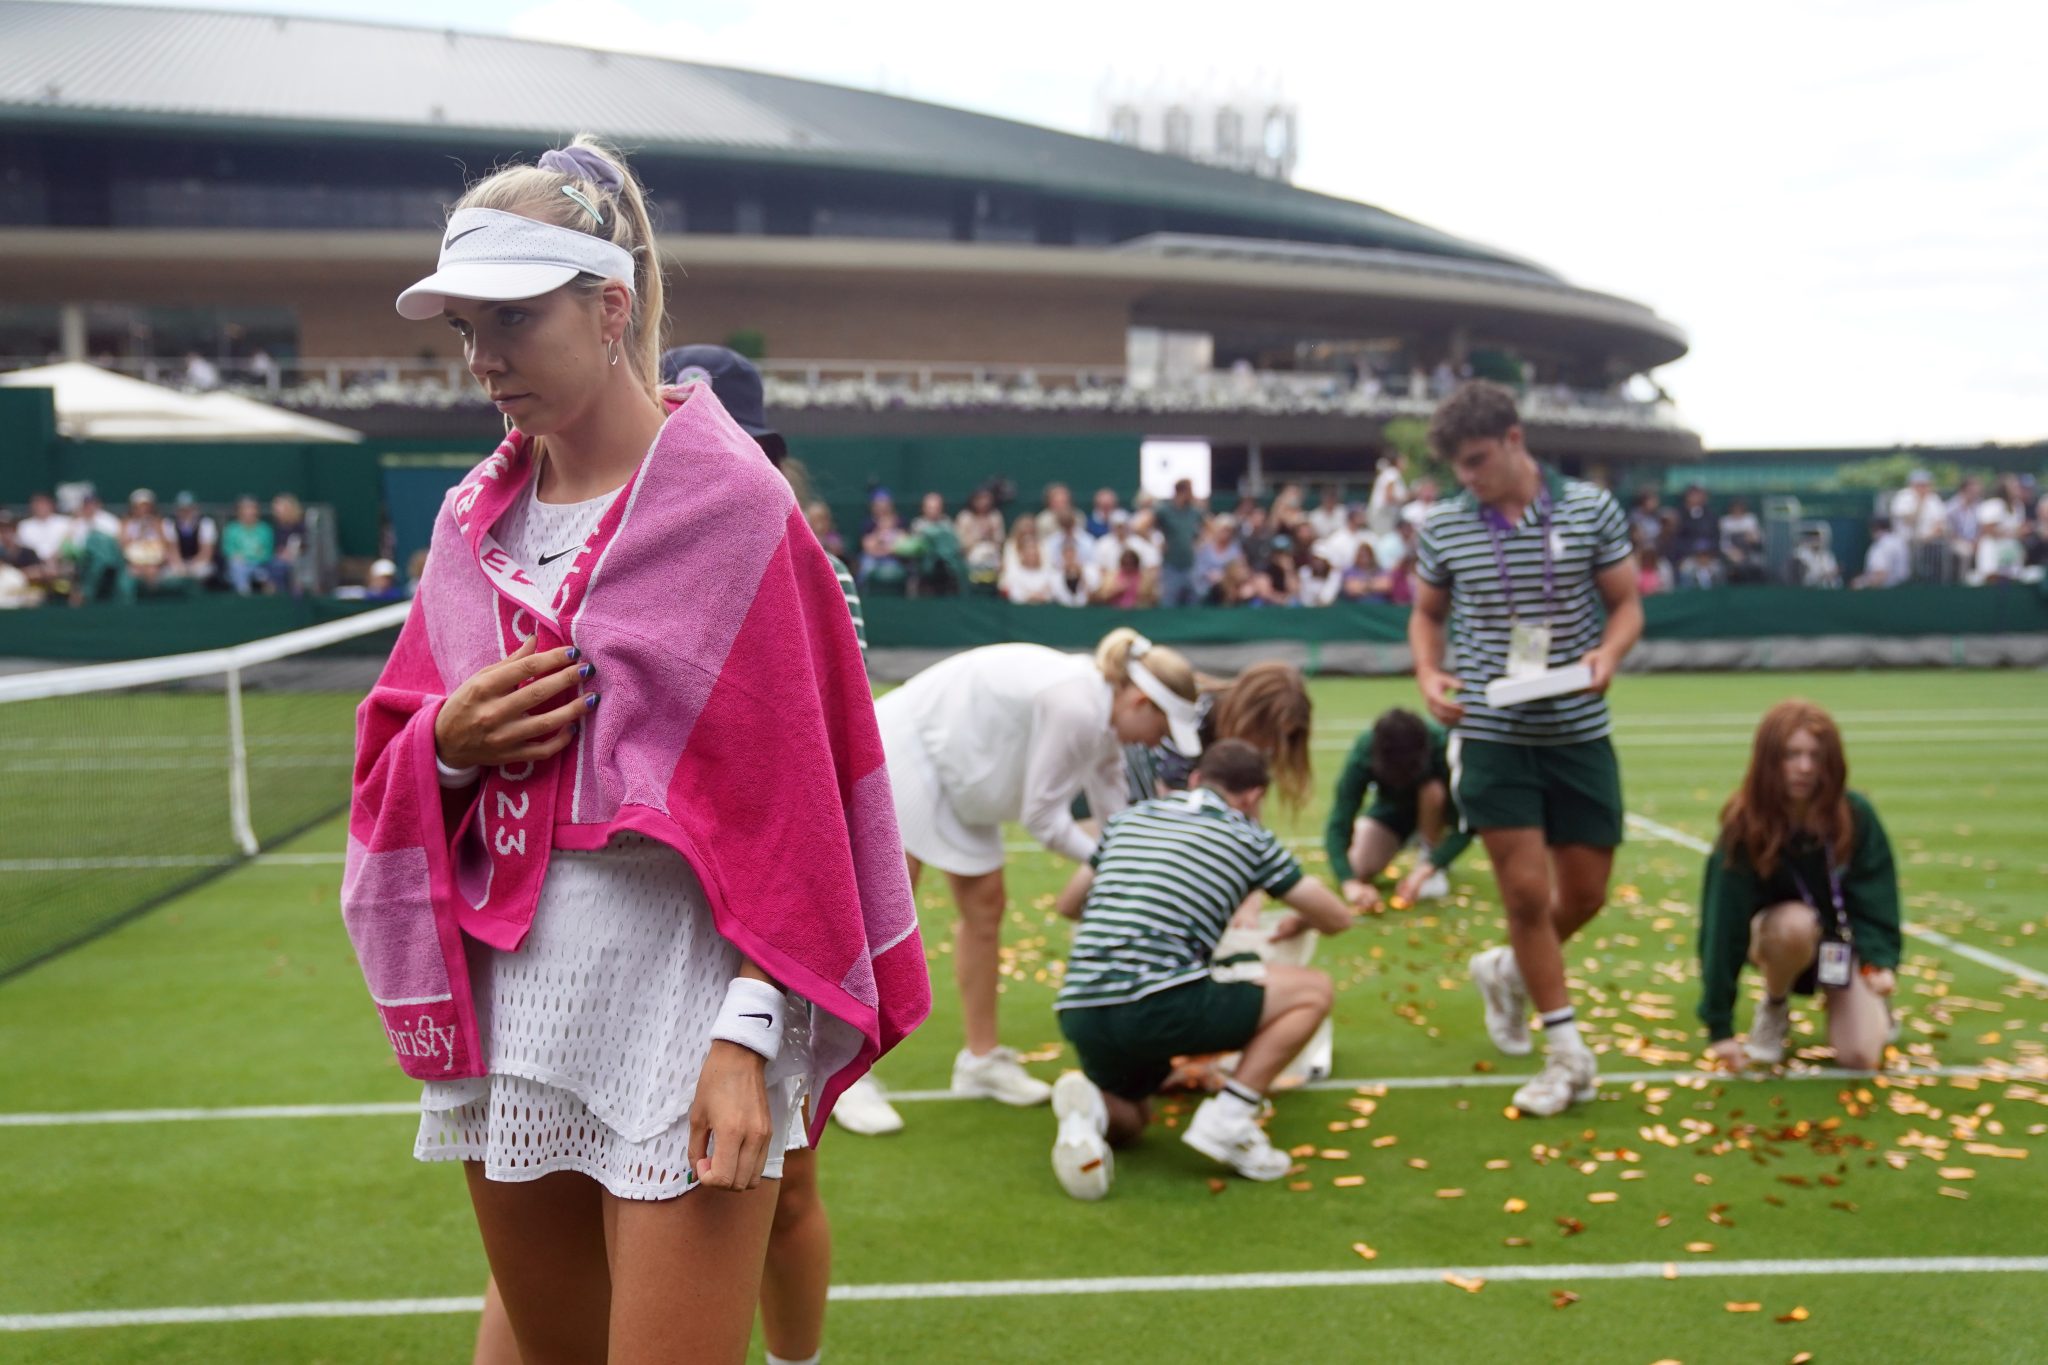 Wimbledon day three: Protesters cause delays as Katie Boulter moves on